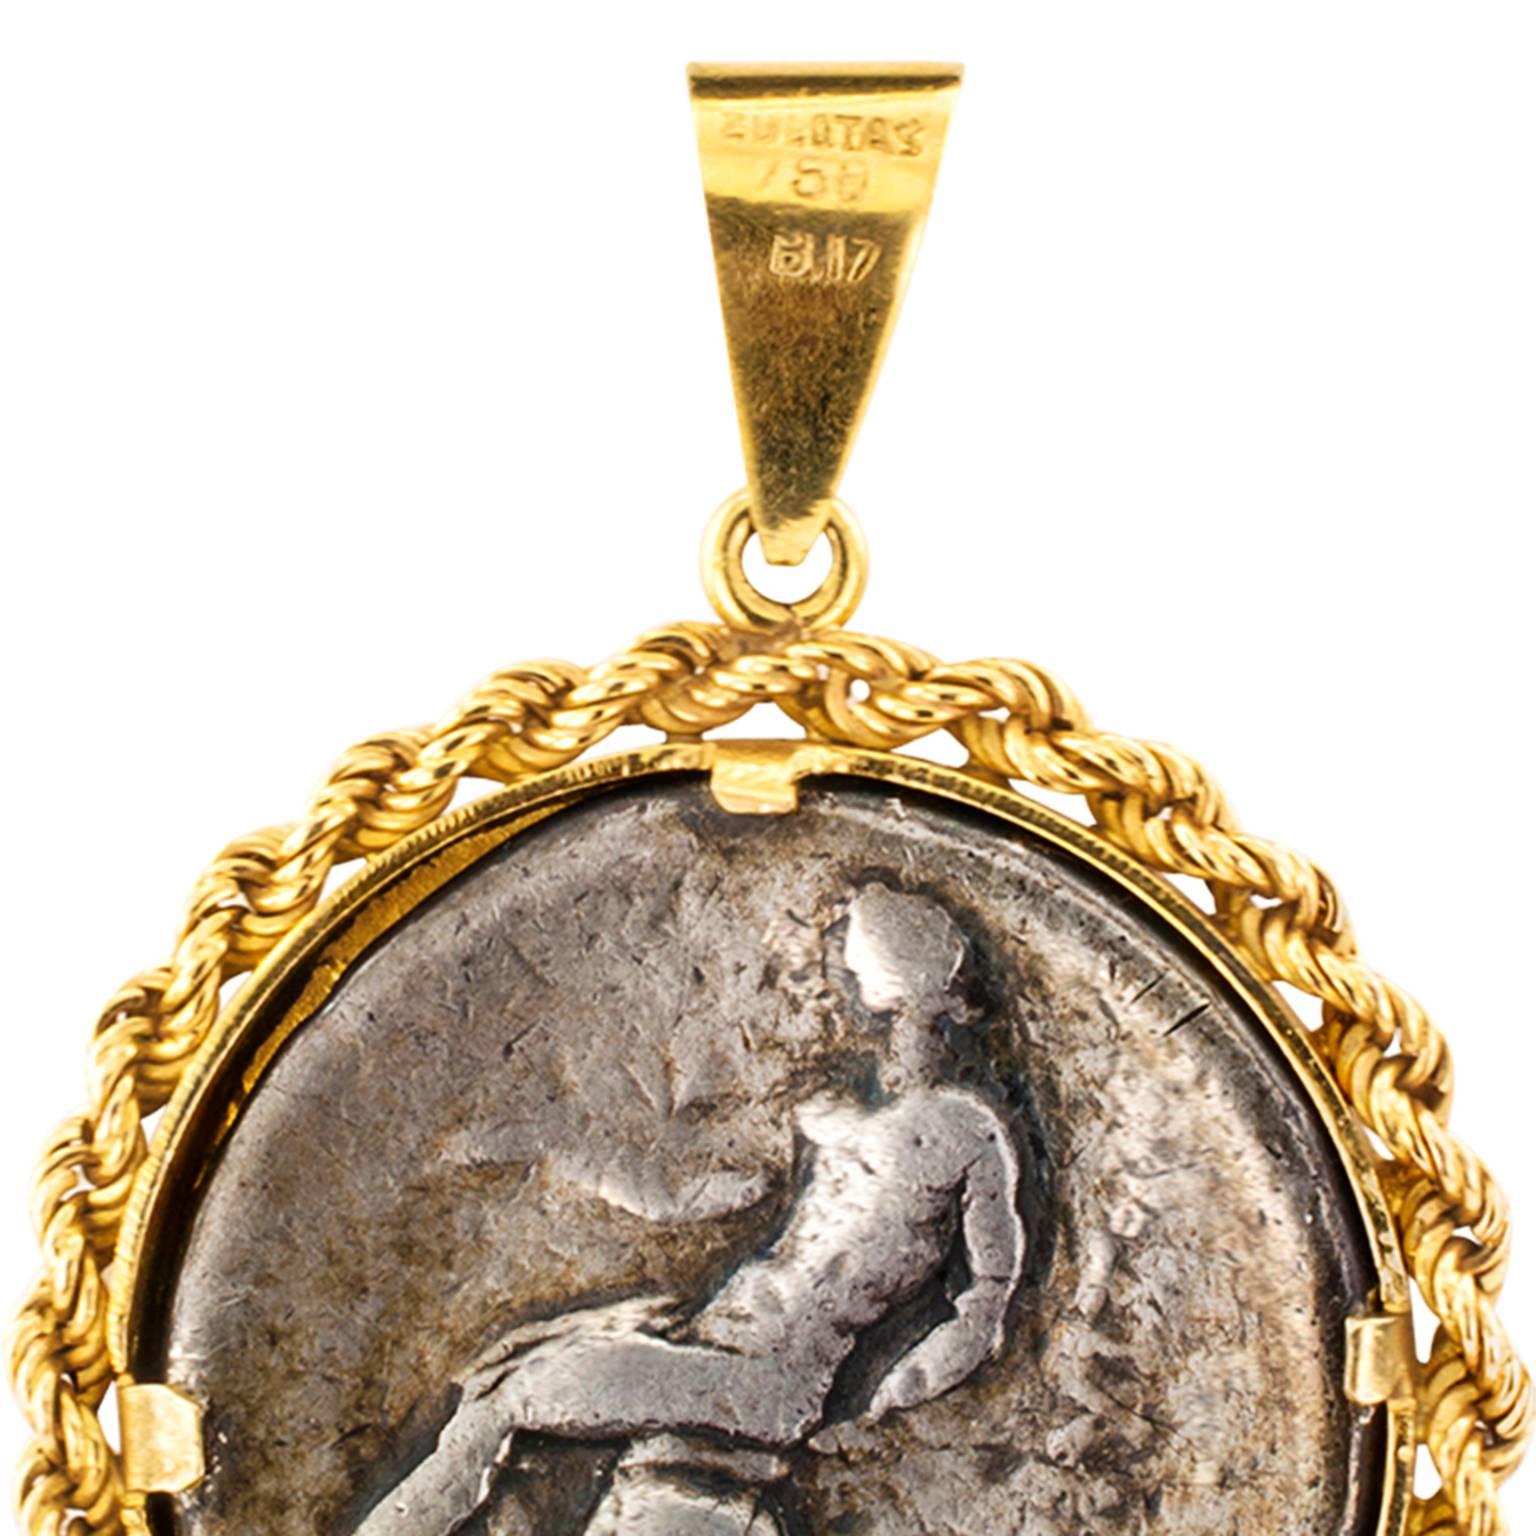 Zolotas Estate Ancient Coin Pendant

Less is more.  Yes.  Here is a prime example of that old saying.  A  very attractive design showcasing an ancient four Drachma Alexander the Great silver coin set within a simple 18 karat yellow gold rope